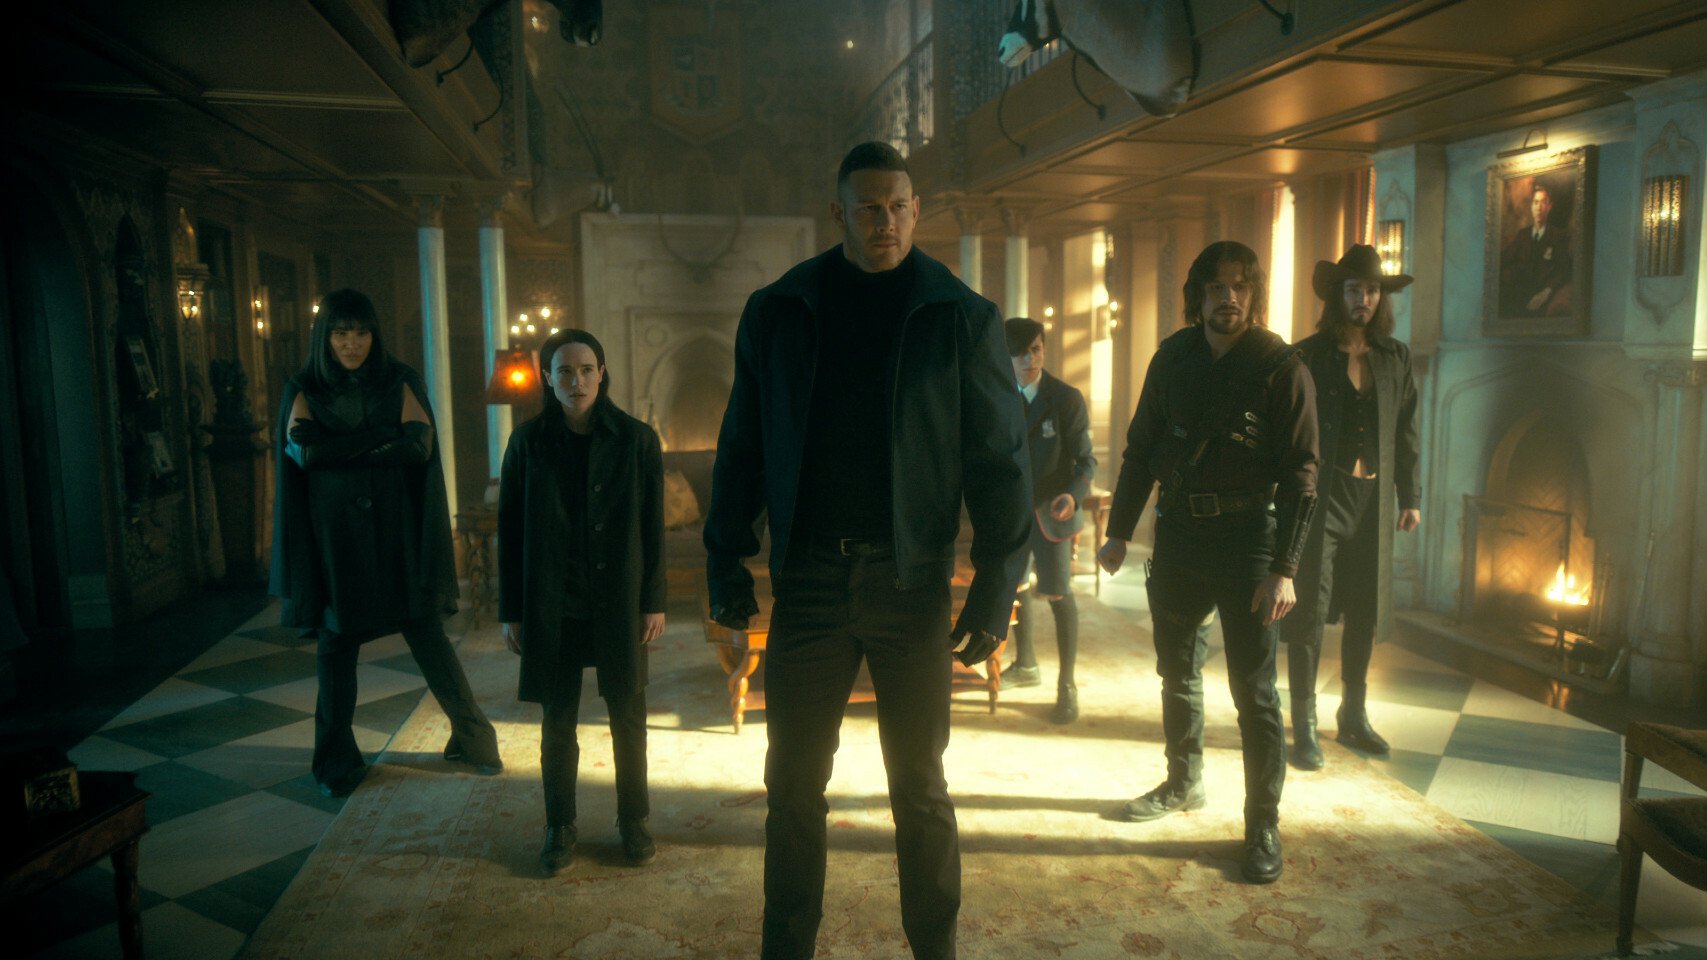 (L to R) Emmy Raver-Lampman as Allison Hargreeves, Elliot Page as Number 7, Tom Hopper as Luther Hargreeves, Aidan Gallagher as Number Five, David Castañeda as Diego Hargreeves, and Robert Sheehan as Klaus Hargreeves in 'The Umbrella Academy' Season 3.